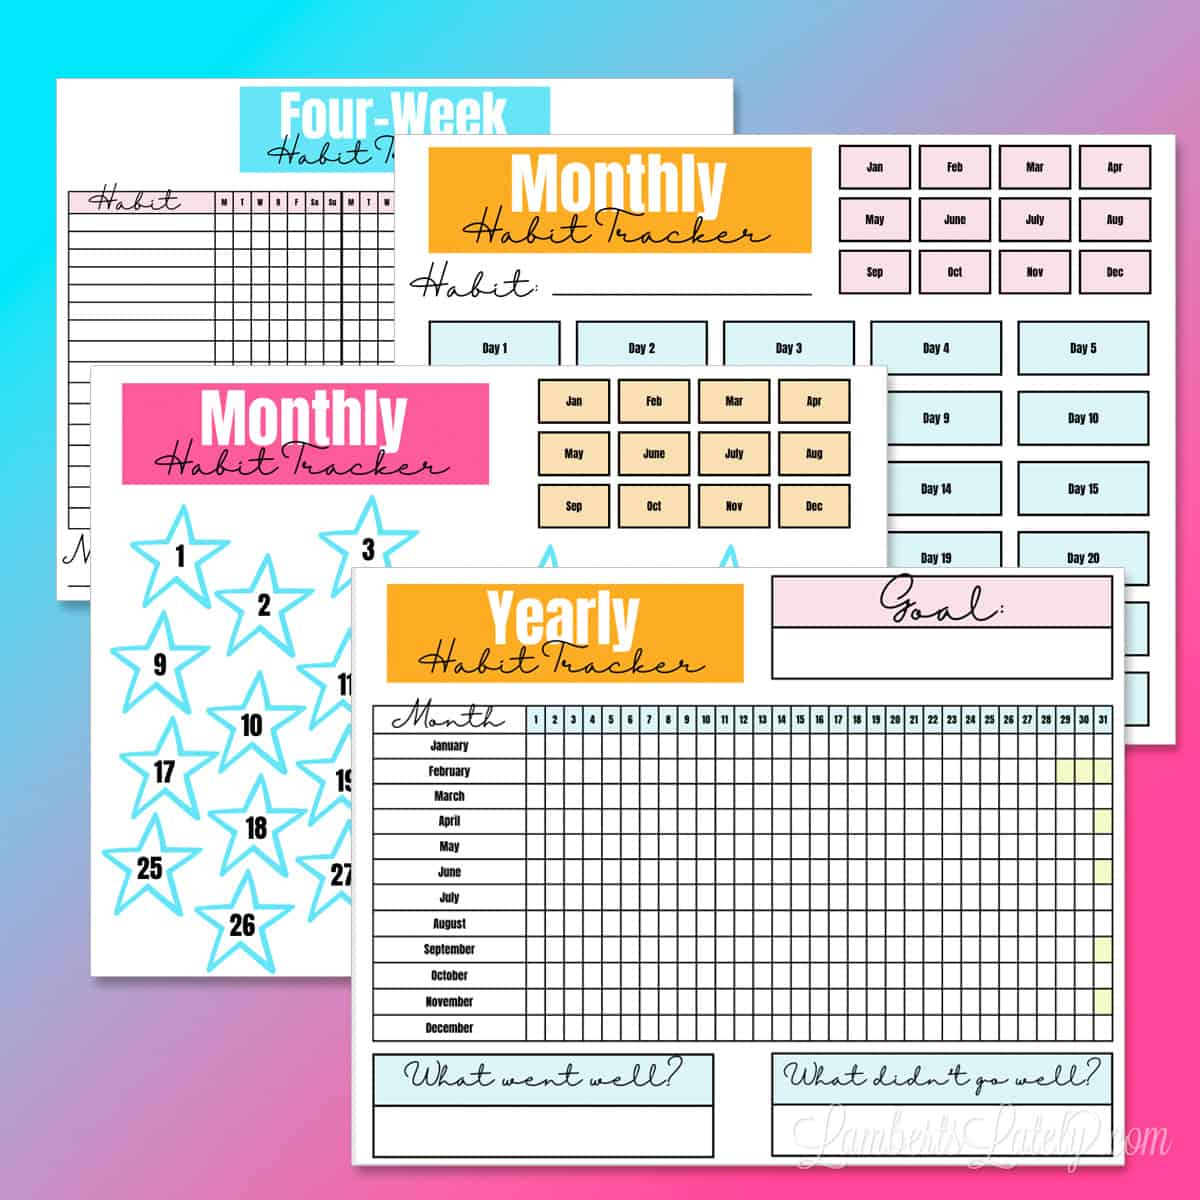 blocky and colorful design on printable habit trackers.